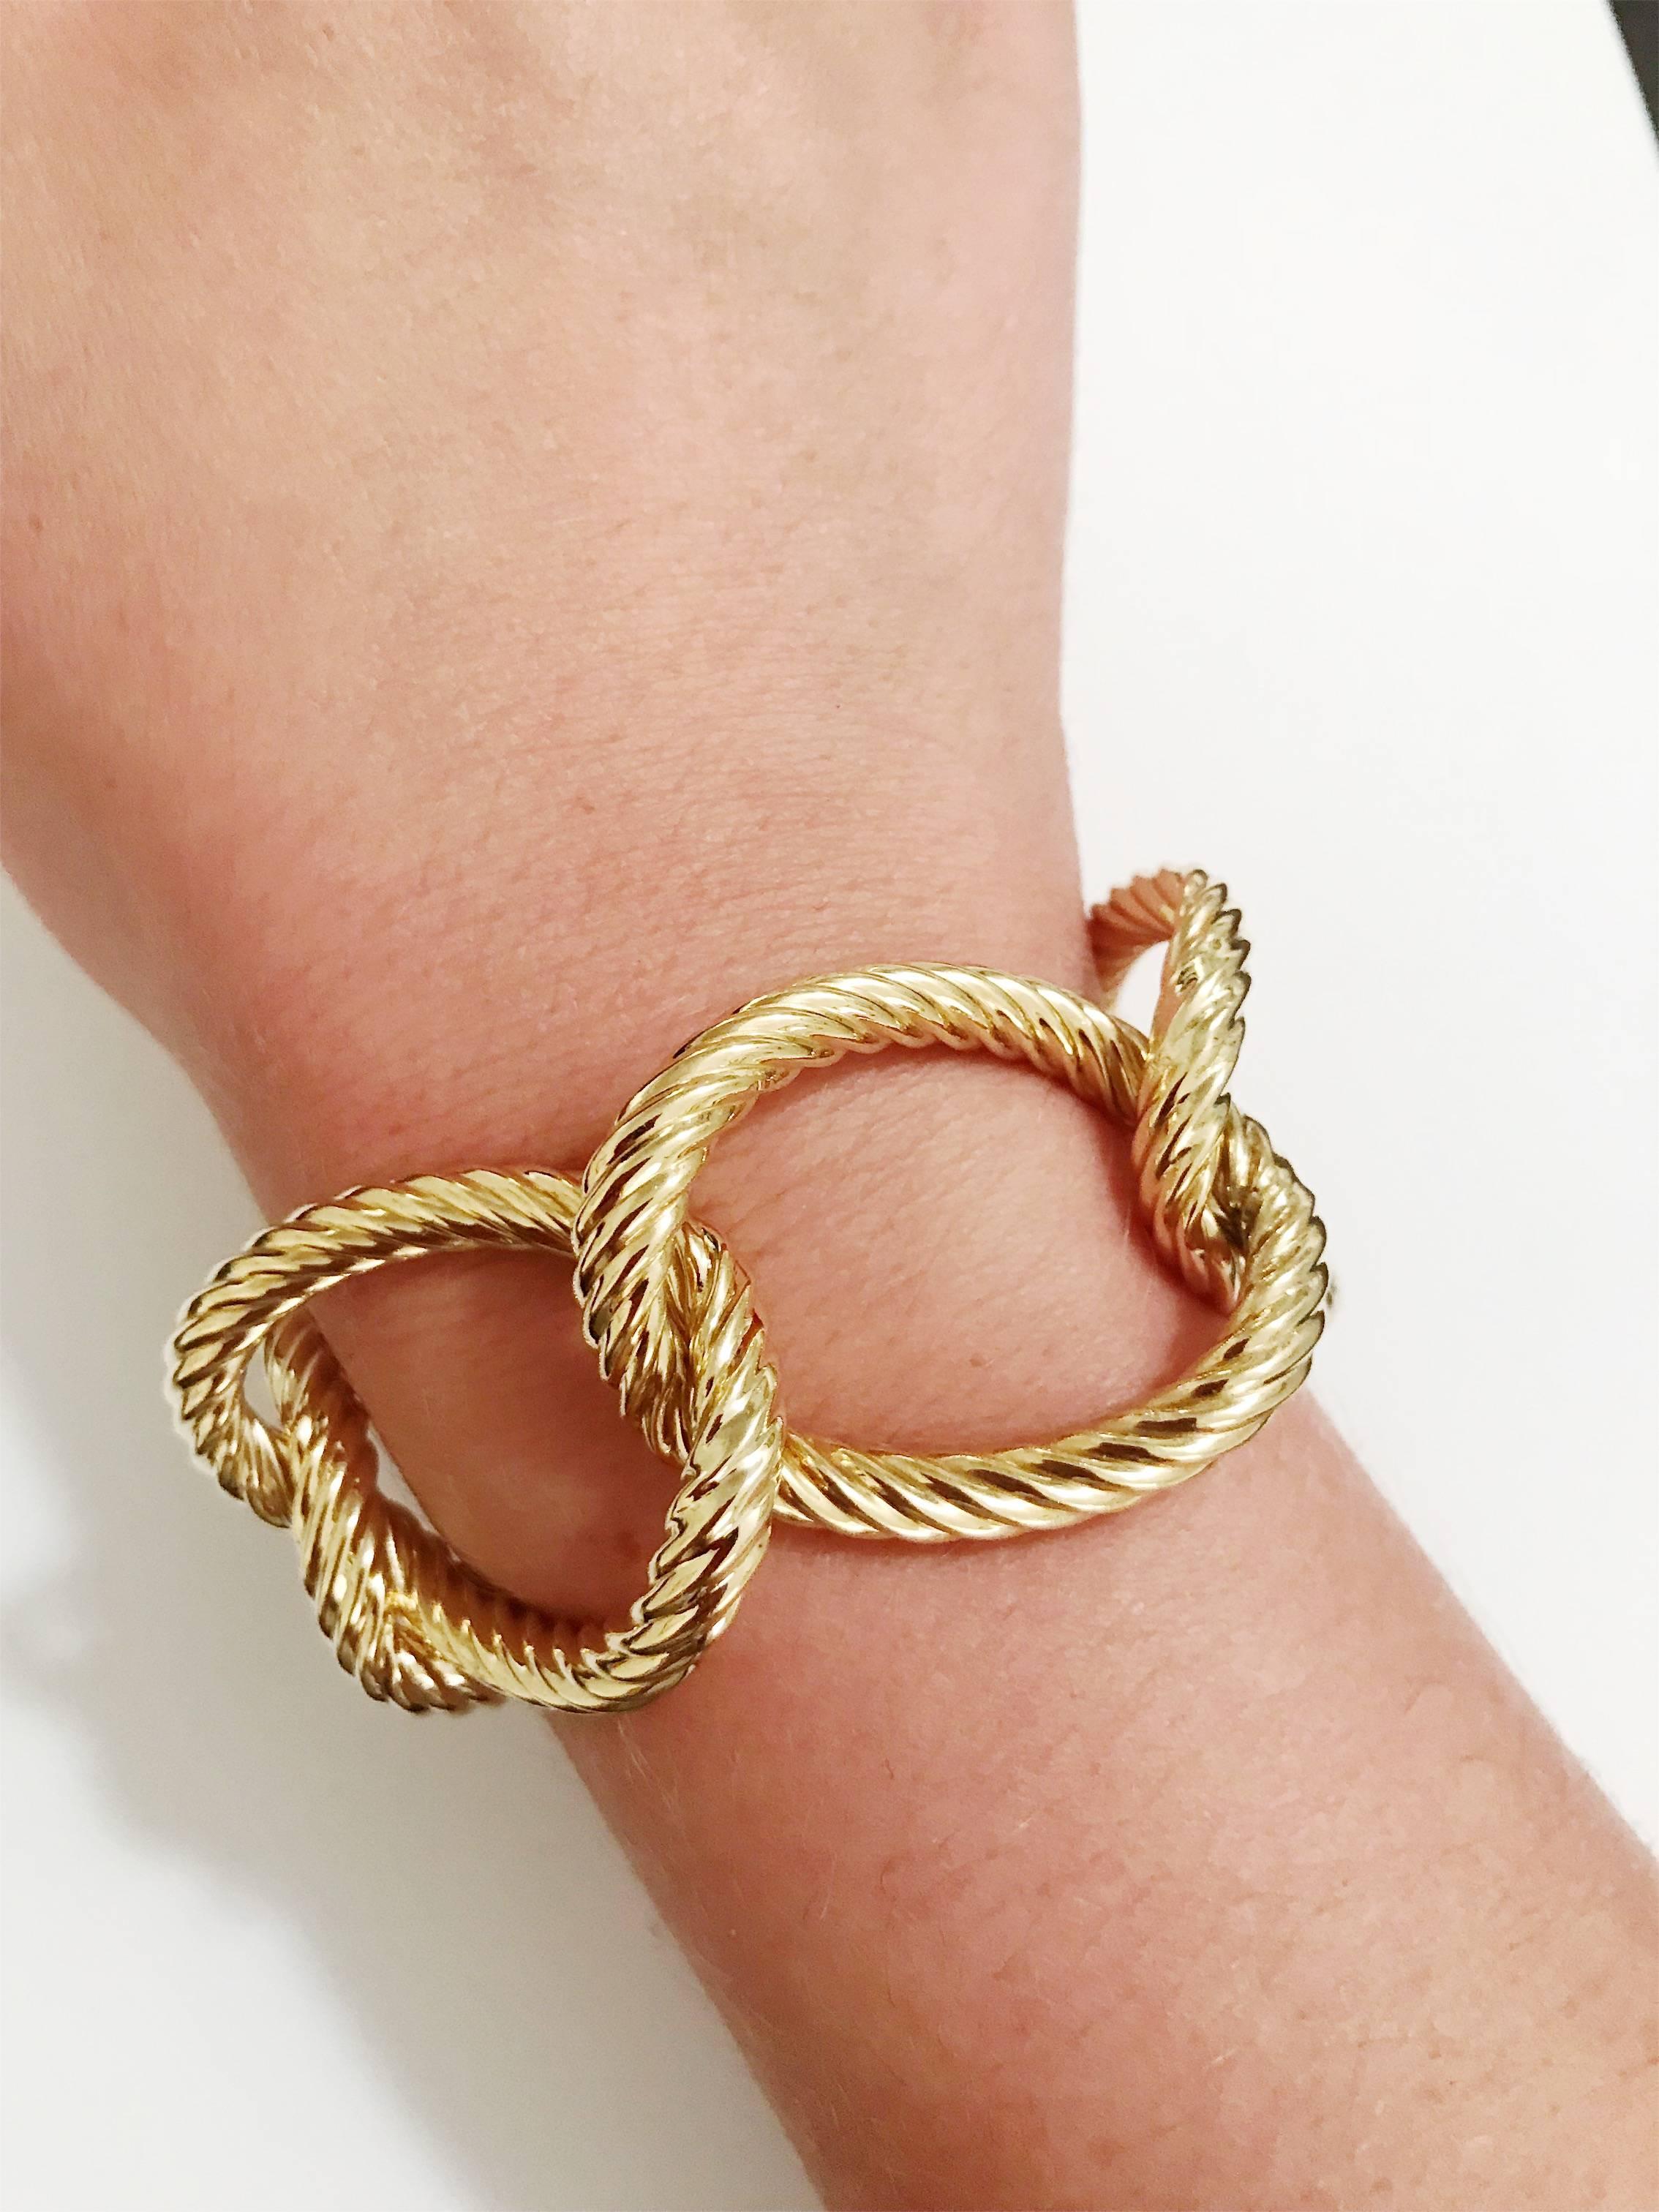 18kt Yellow Gold Oval Spiral Link Bracelet with hinge clasp. Each oval link measures 1 and a half inch wide and 1 and quarter tall.

This bracelet can be made with any color gold and can be sized to any wrist. 

Please let me know if you have any